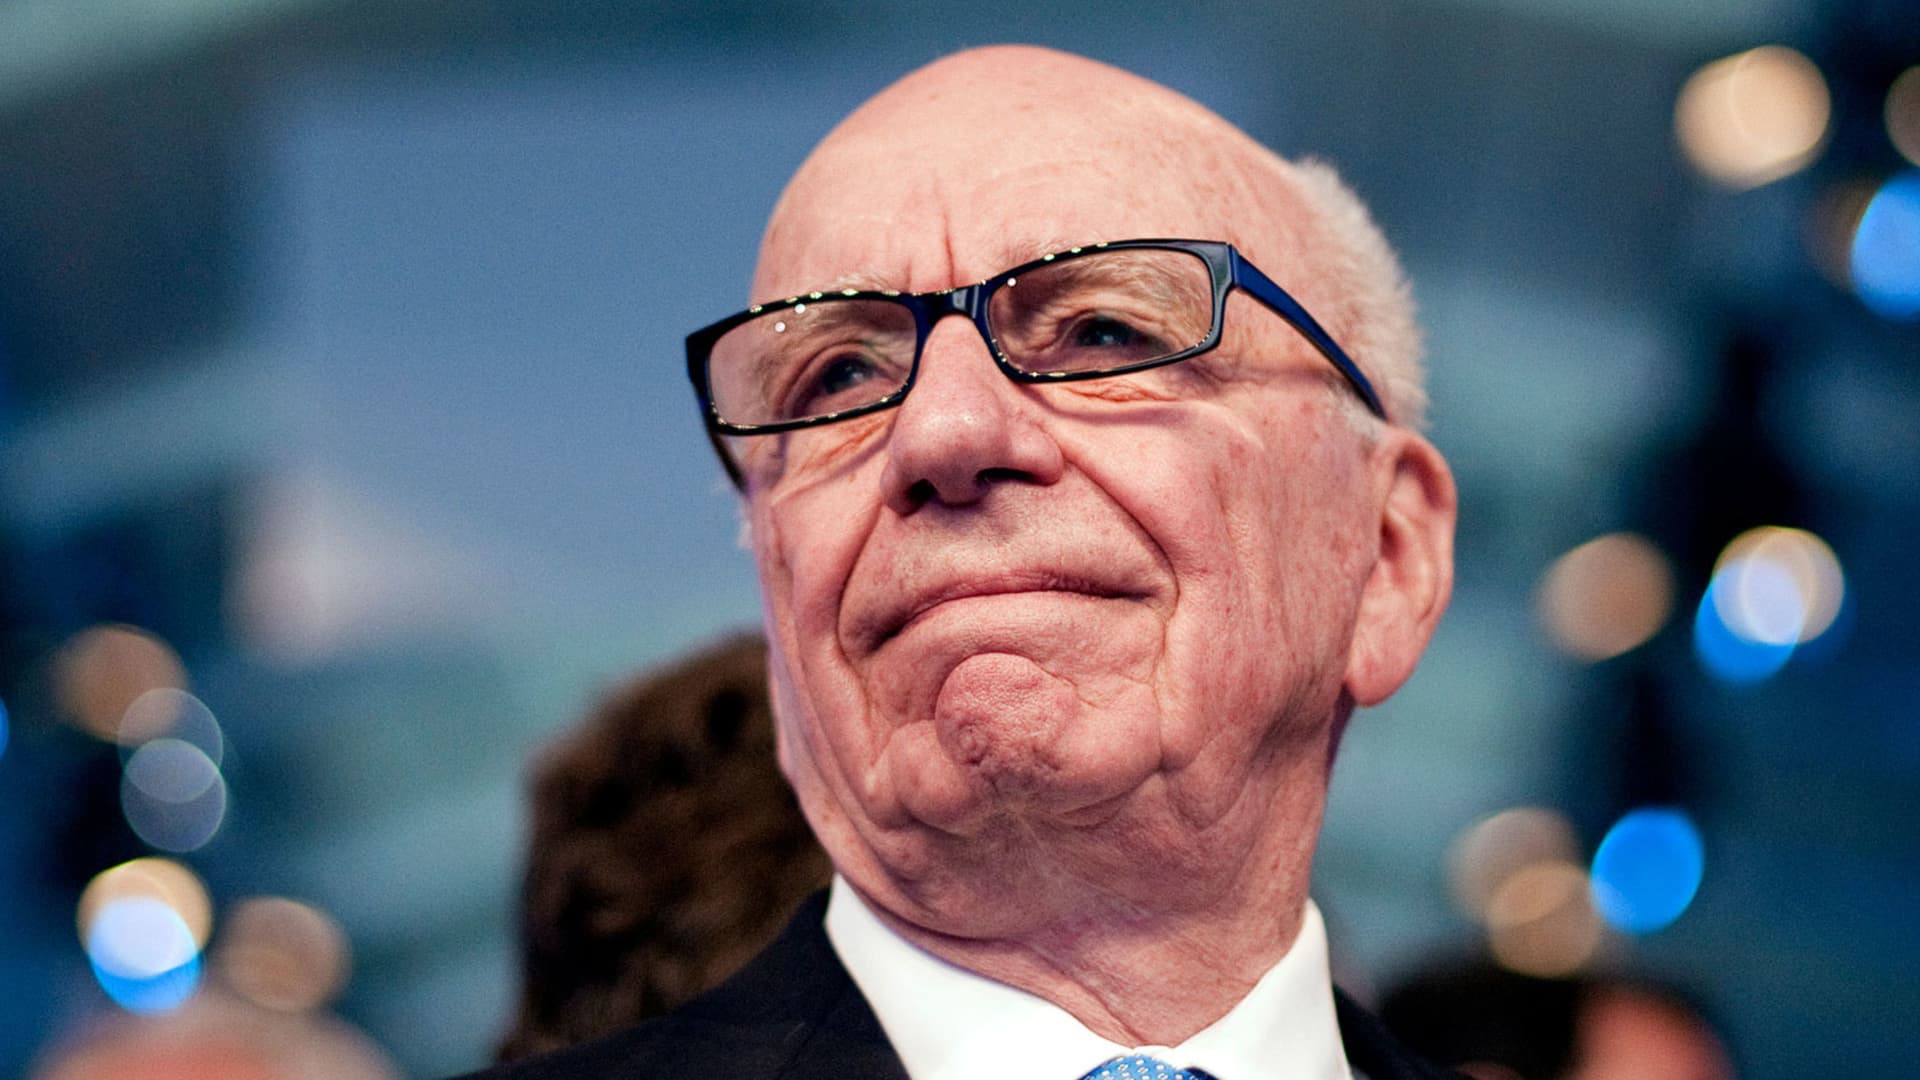 Fox News apologizes to judge for failing to disclose Rupert Murdoch's role at the network